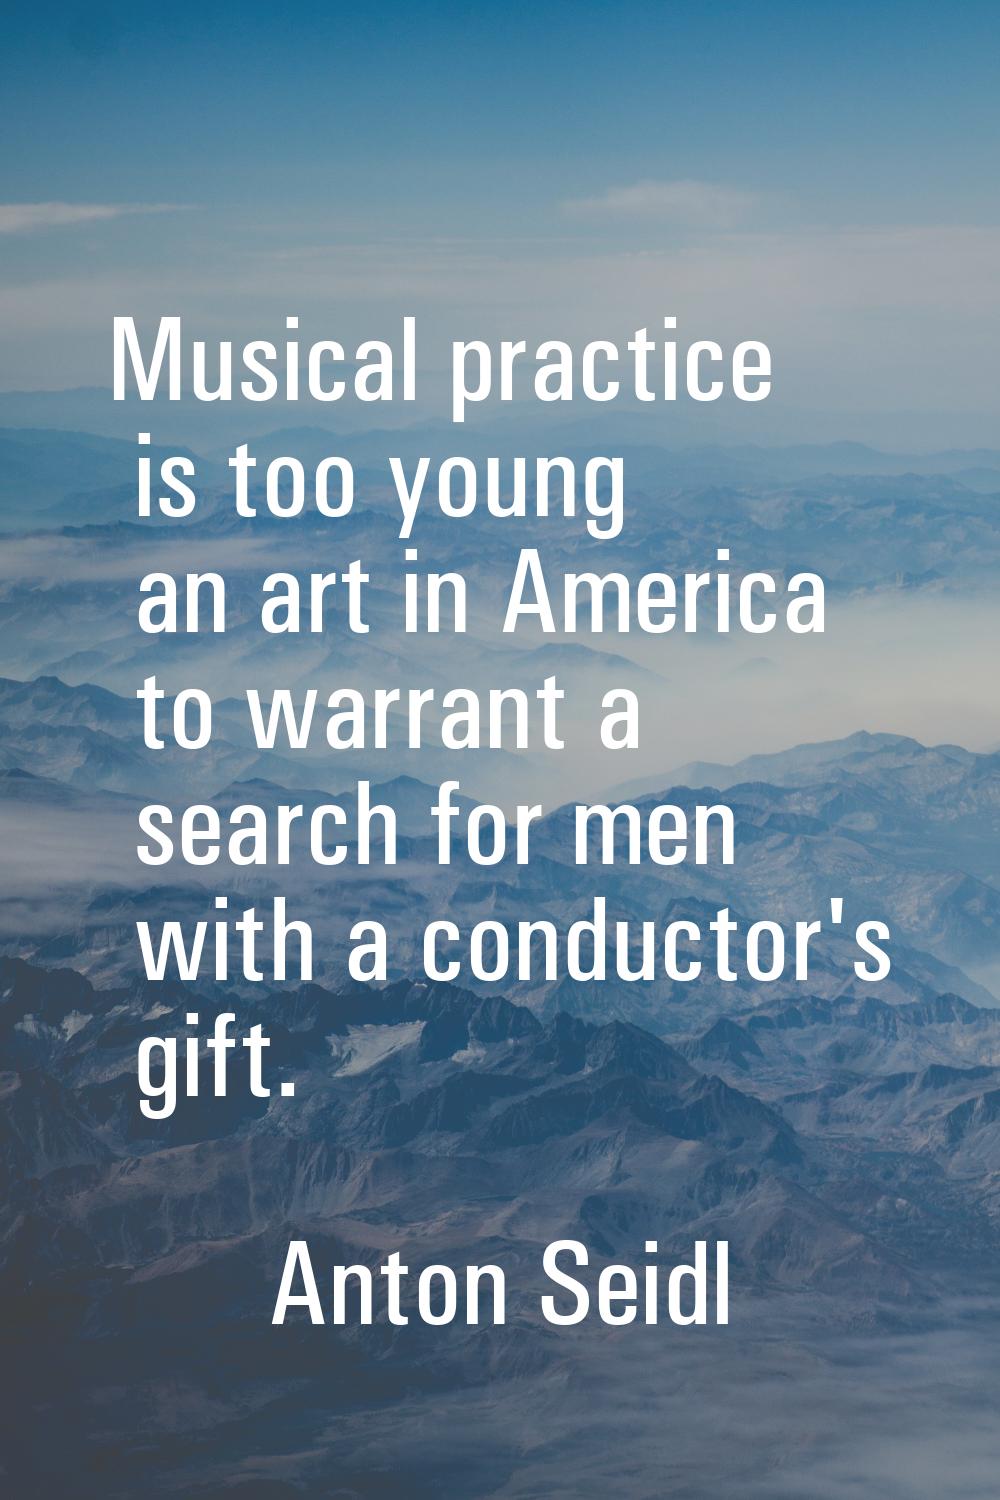 Musical practice is too young an art in America to warrant a search for men with a conductor's gift